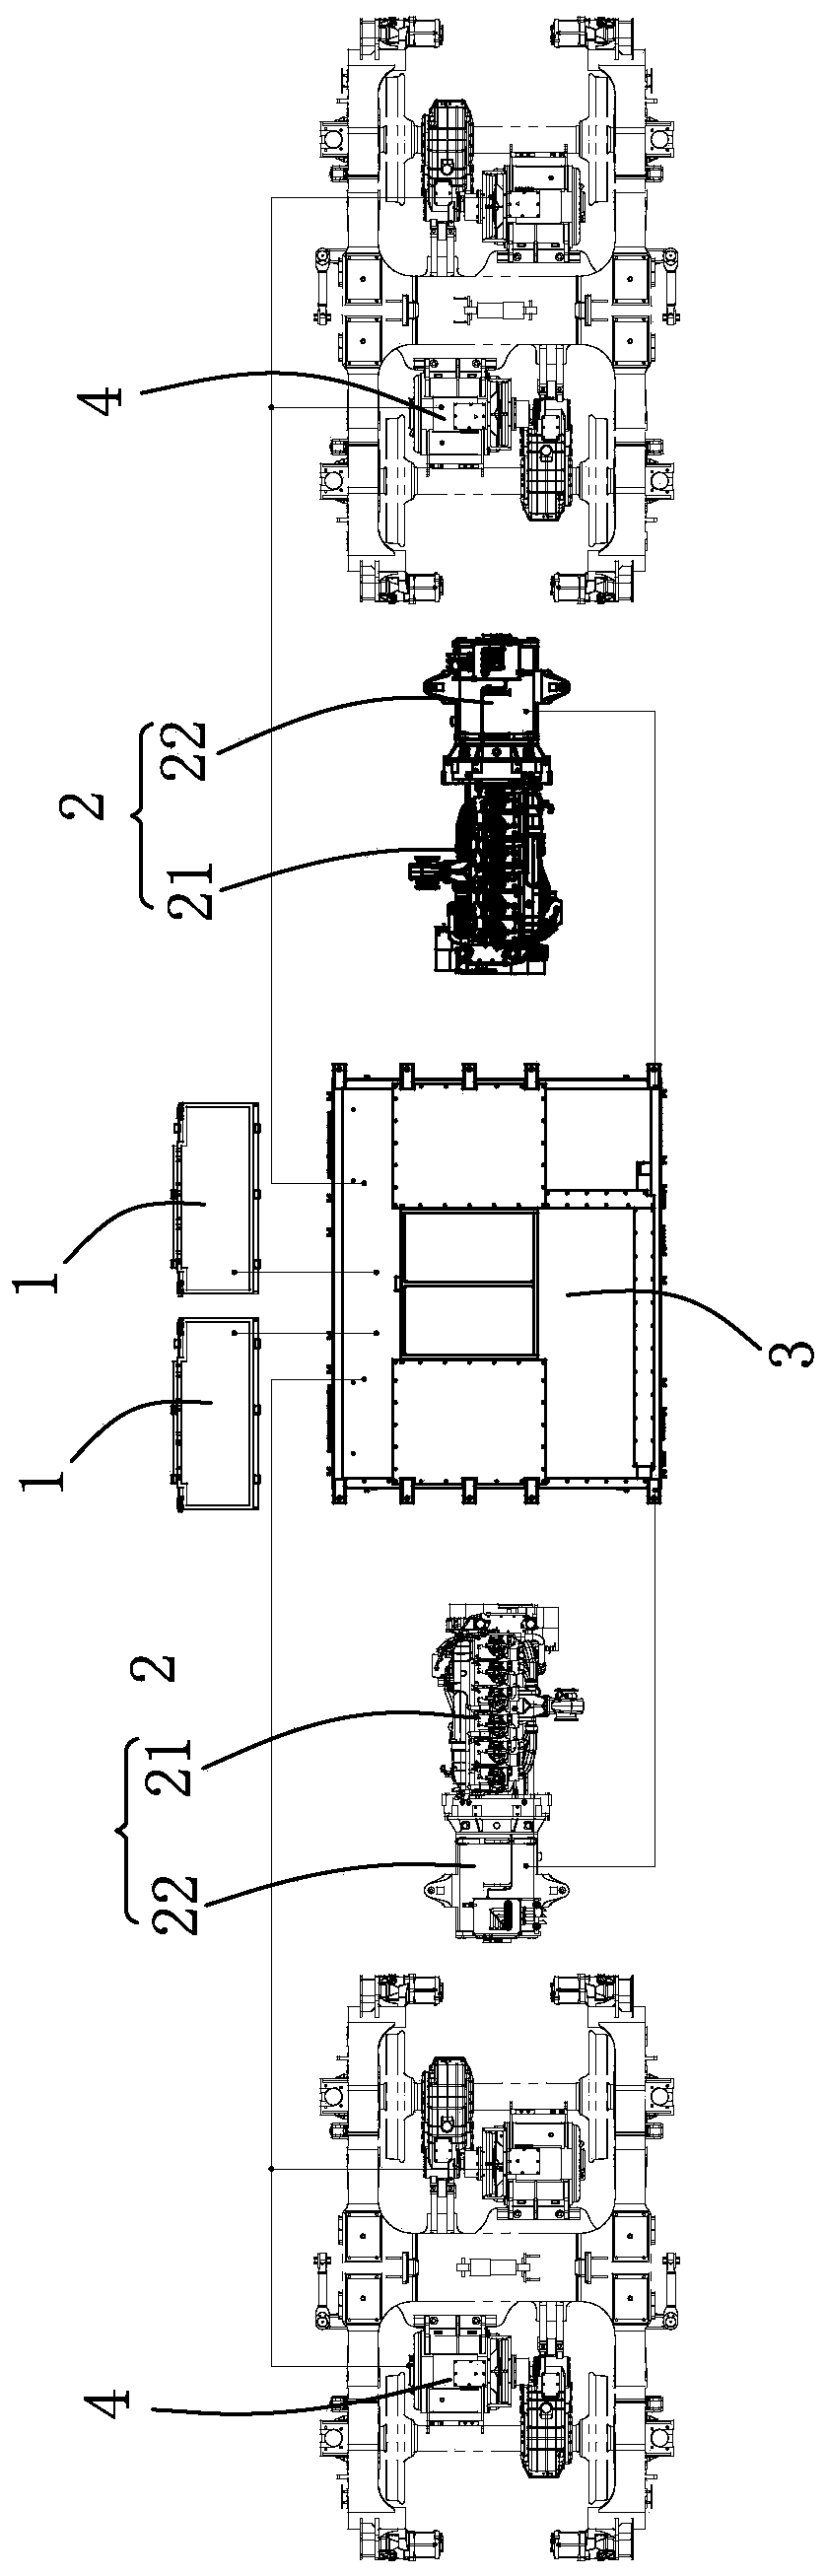 Hybrid power drive system based on electric drive and rail engineering vehicle